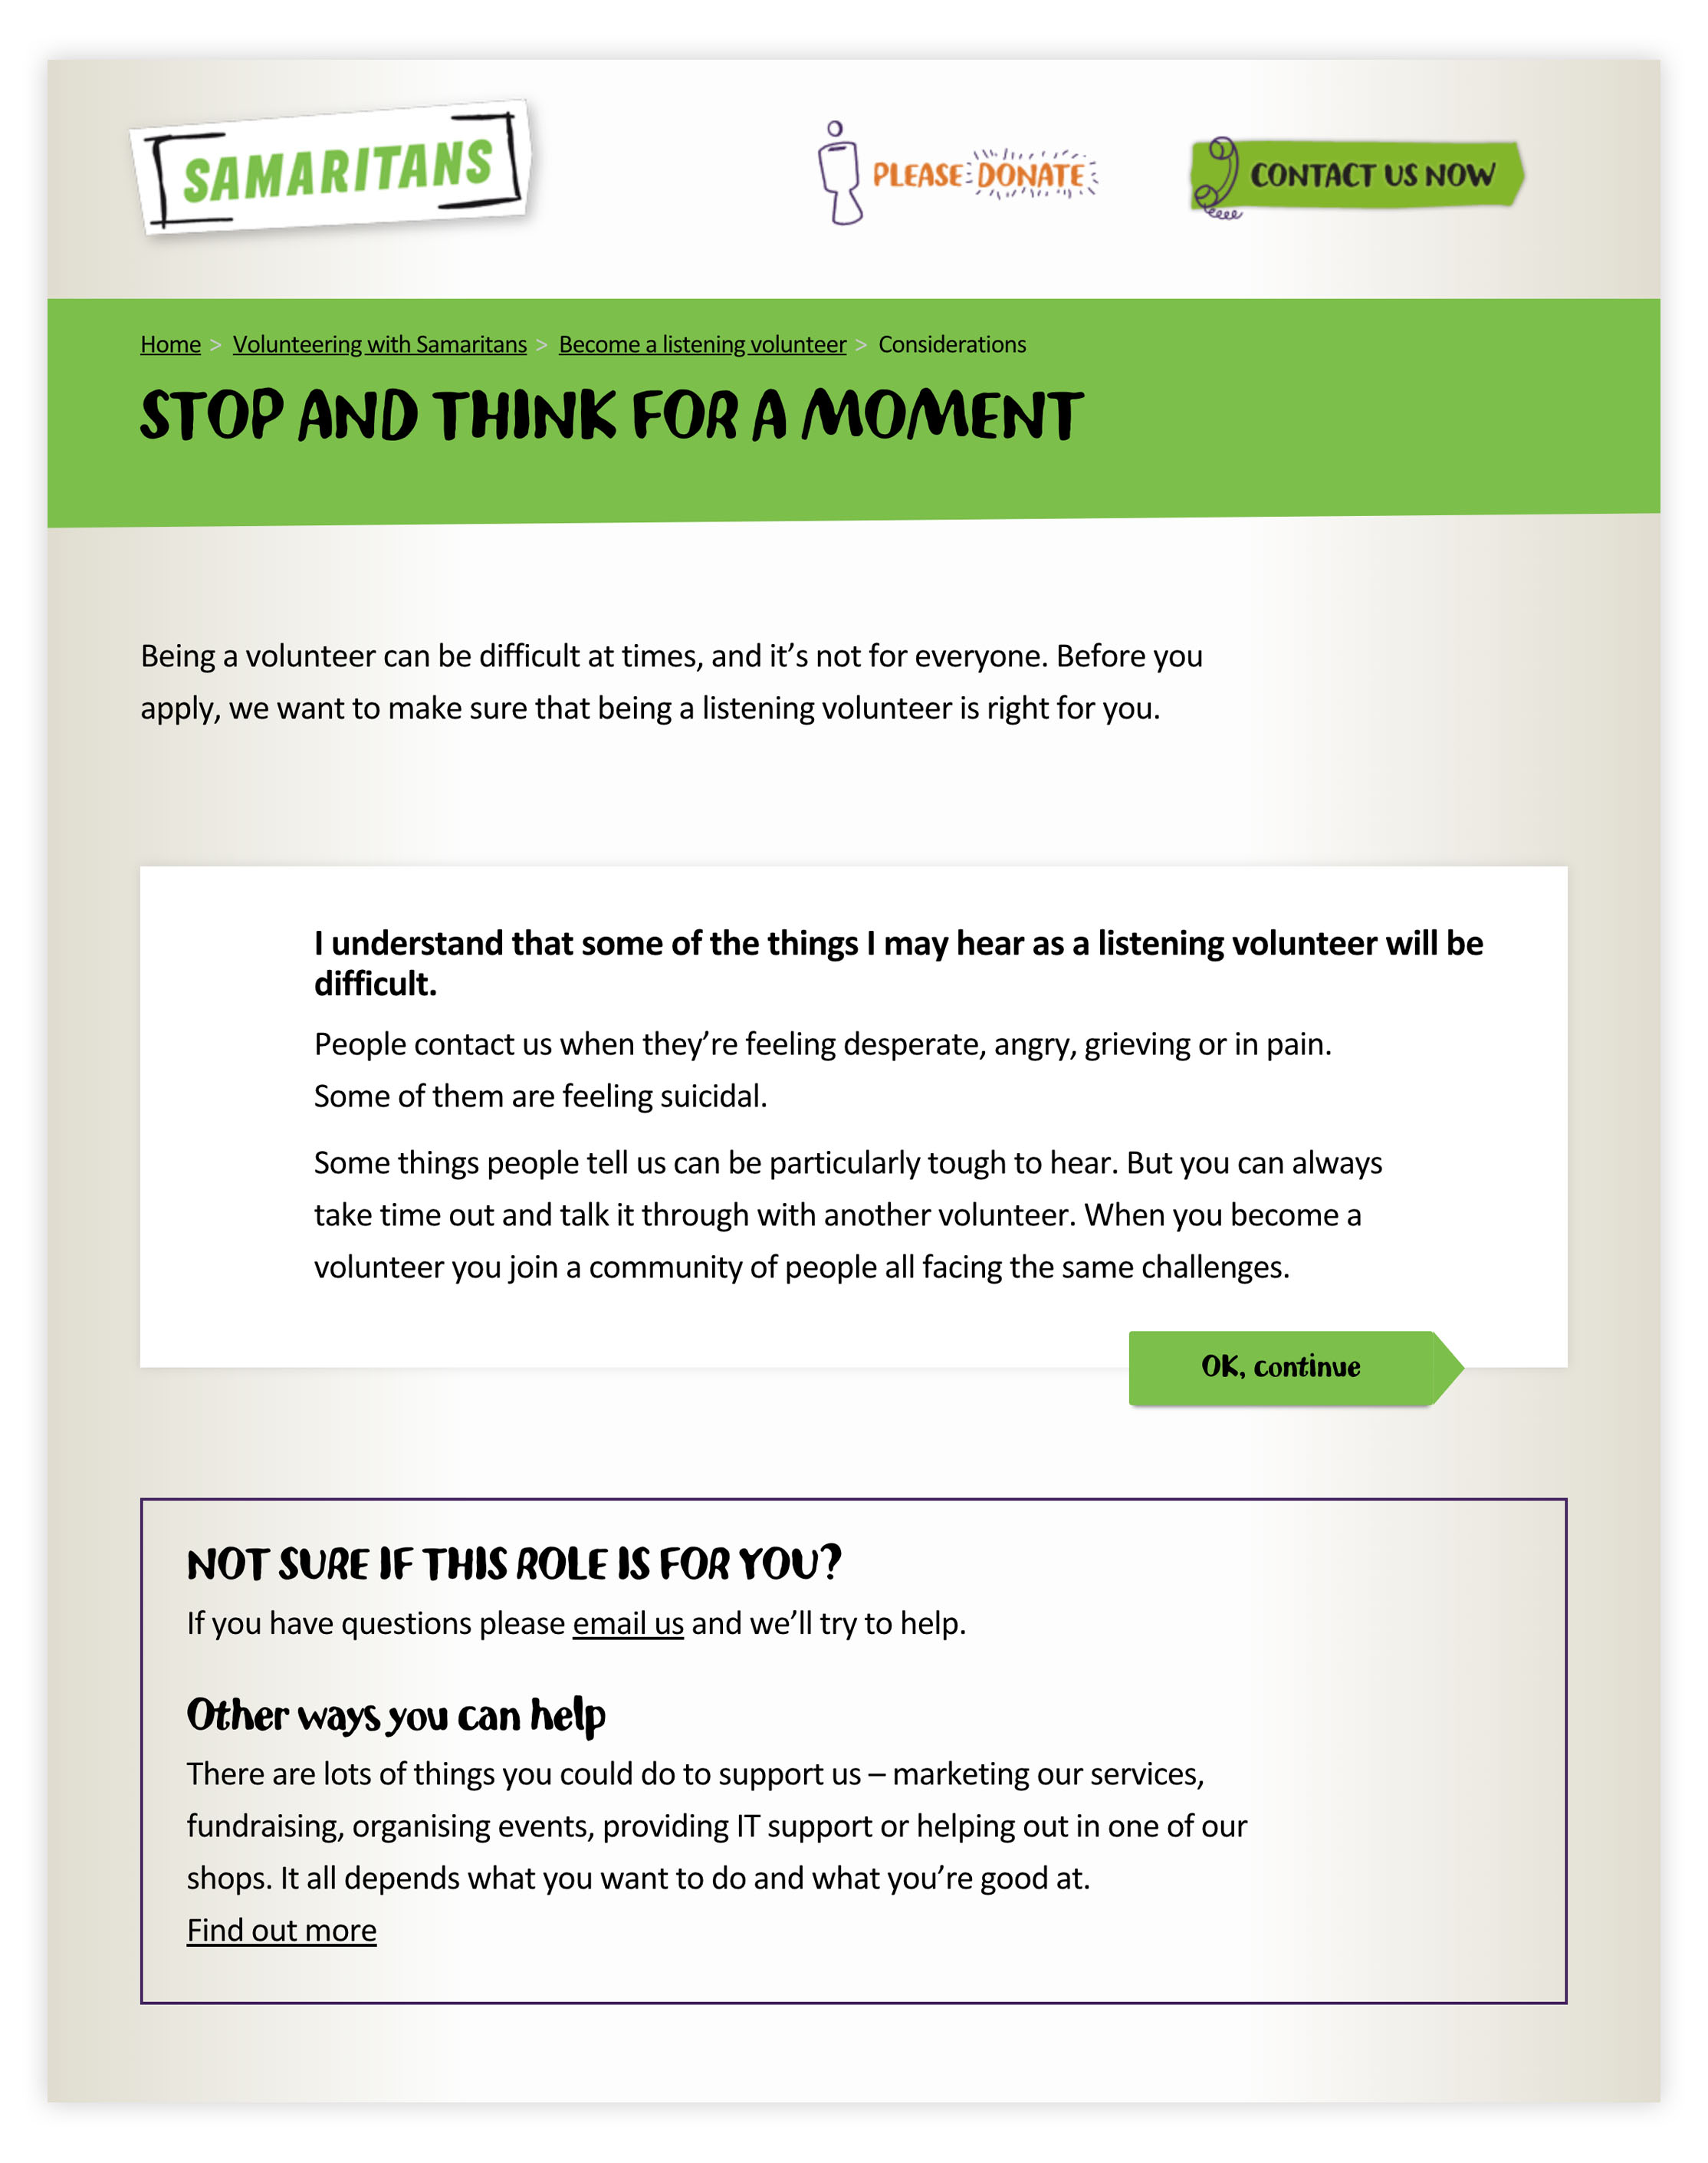 The test design for the stop and think page